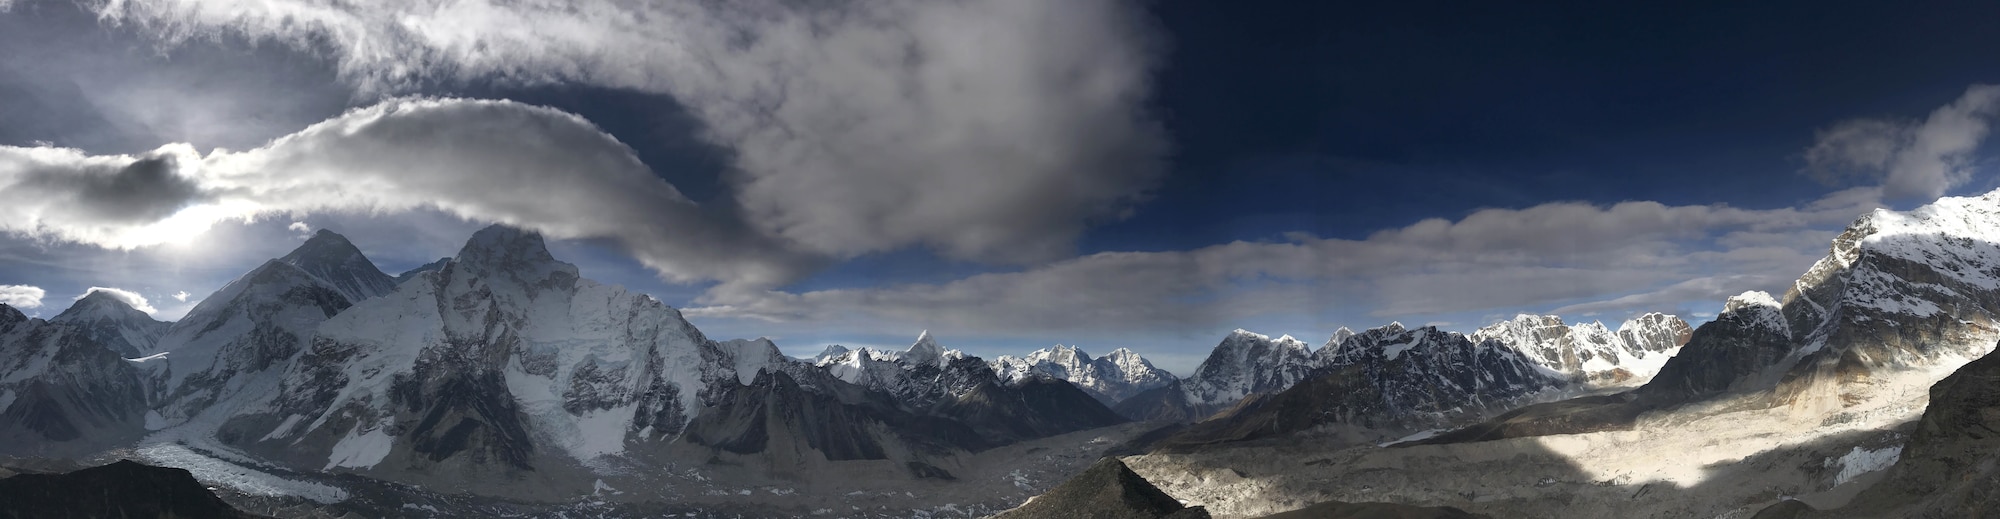 A panoramic view of Mount Everest on May 21, 2017. Mount Everest is Earth’s highest mountain, its peak is 29,030 feet above sea level. (courtesy photo)